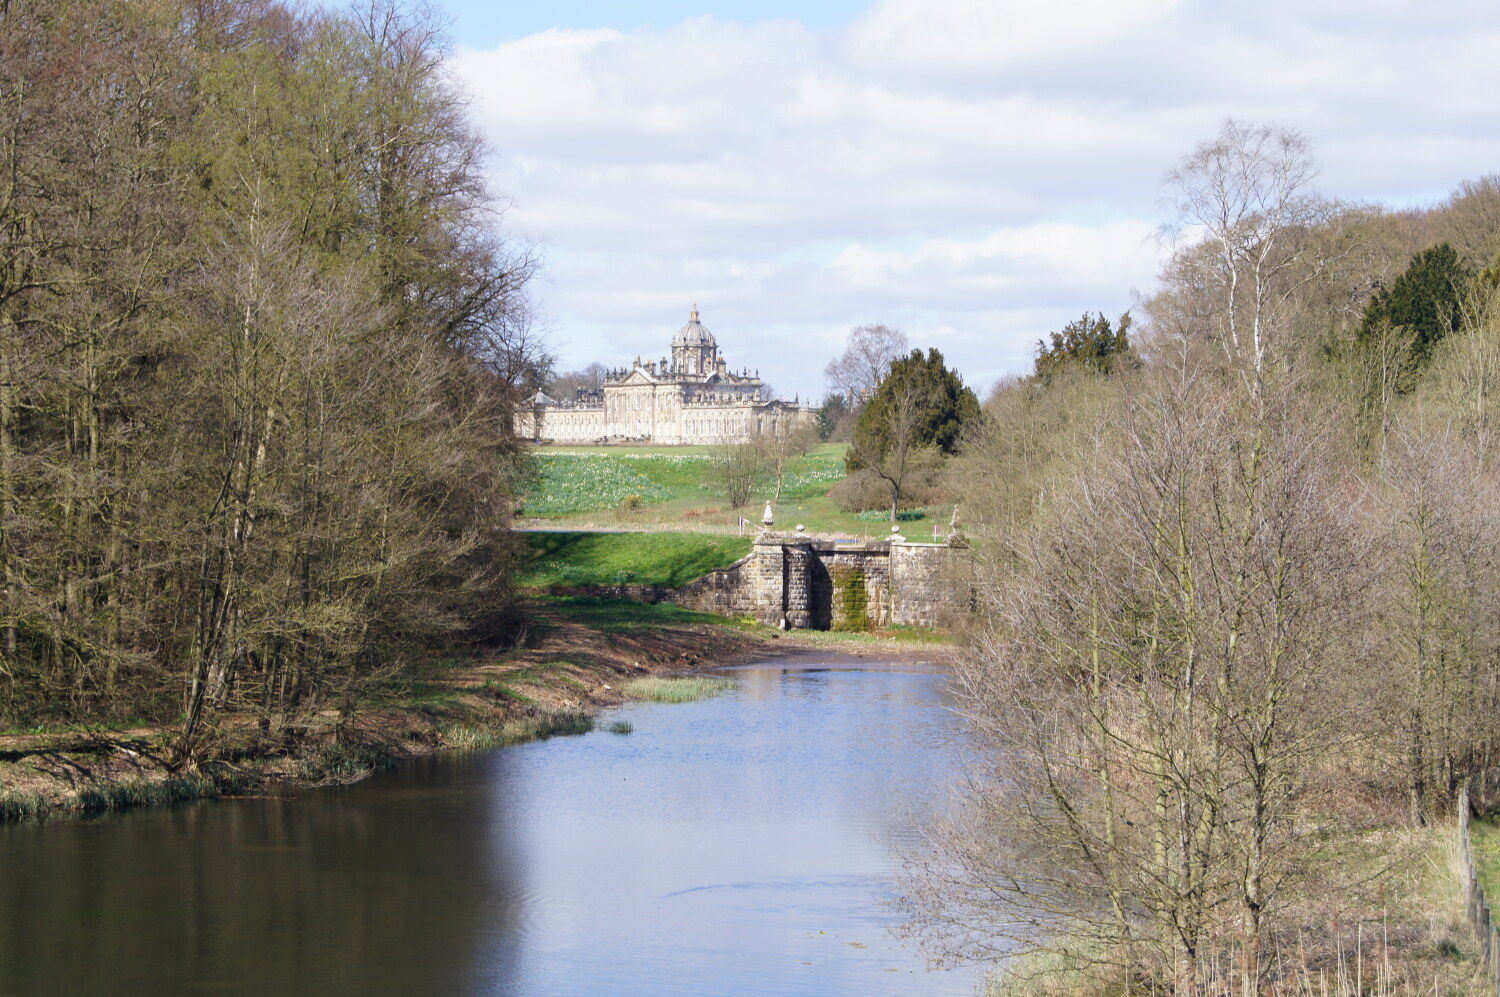 View to Castle Howard from New River